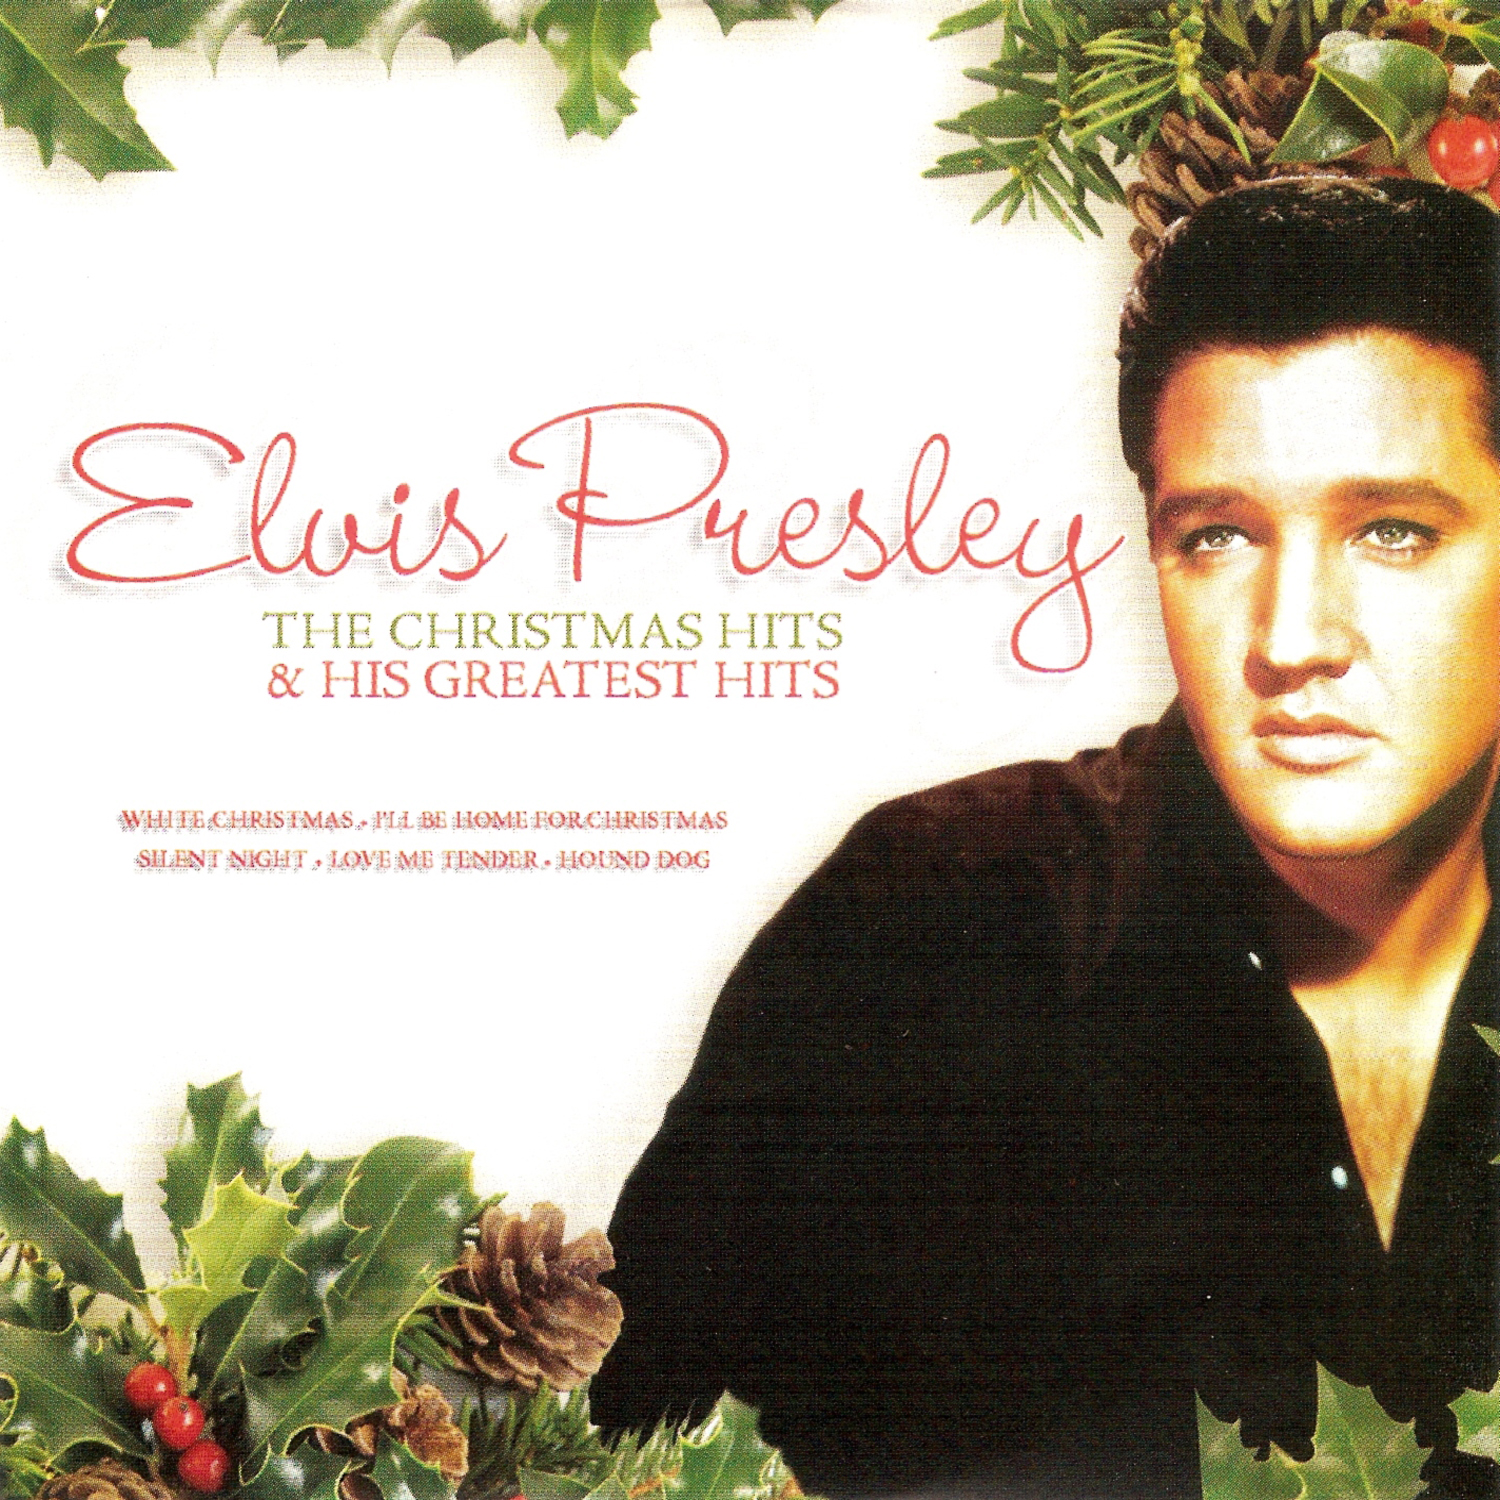 The Christmas Hits & His Greatest Hits